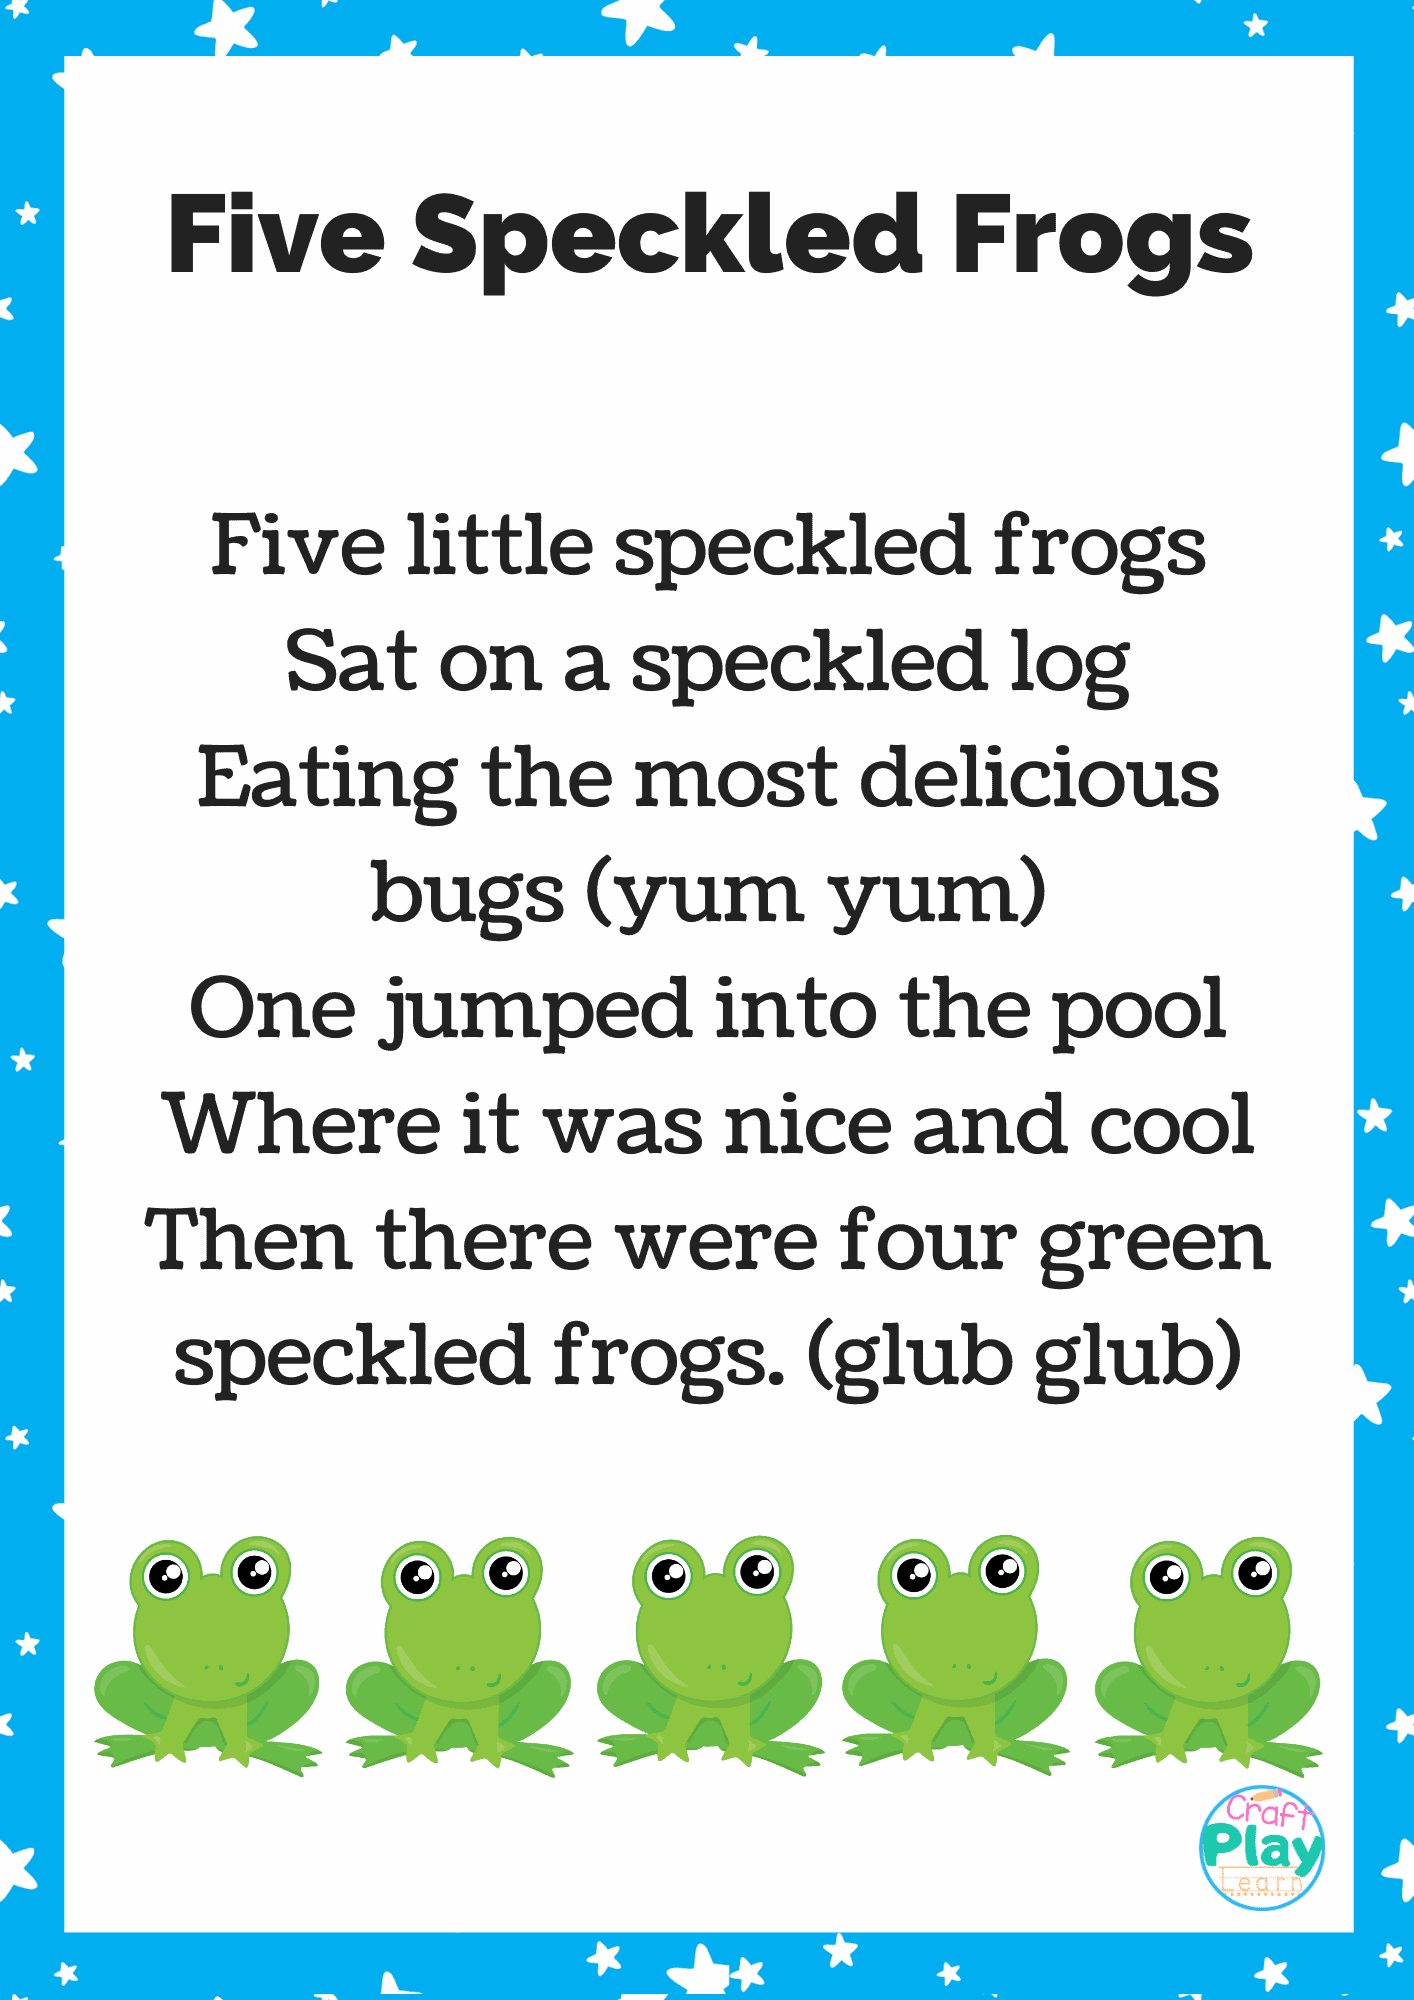 five-speckled-frogs-activities-and-printable-lyrics-the-inspiration-edit